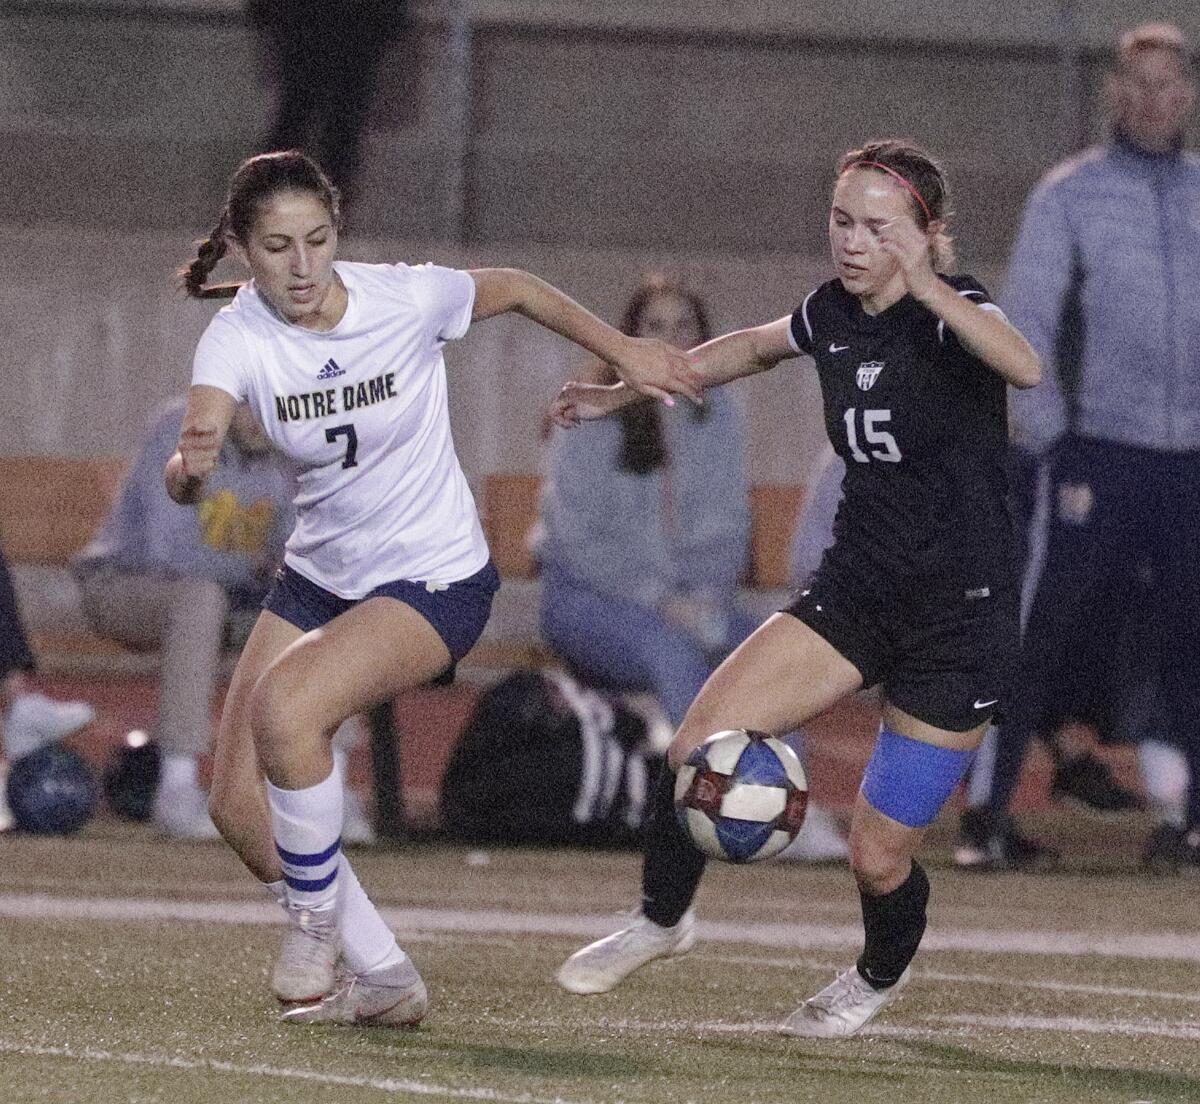 Flintridge Sacred Heart's Lauren Bolte dribbles with the ball with Sherman Oaks Notre Dame's Kiana Kazadzis giving chase in a Mission League girls' soccer game at Occidental College in Los Angeles on Wednesday, January 8, 2020.